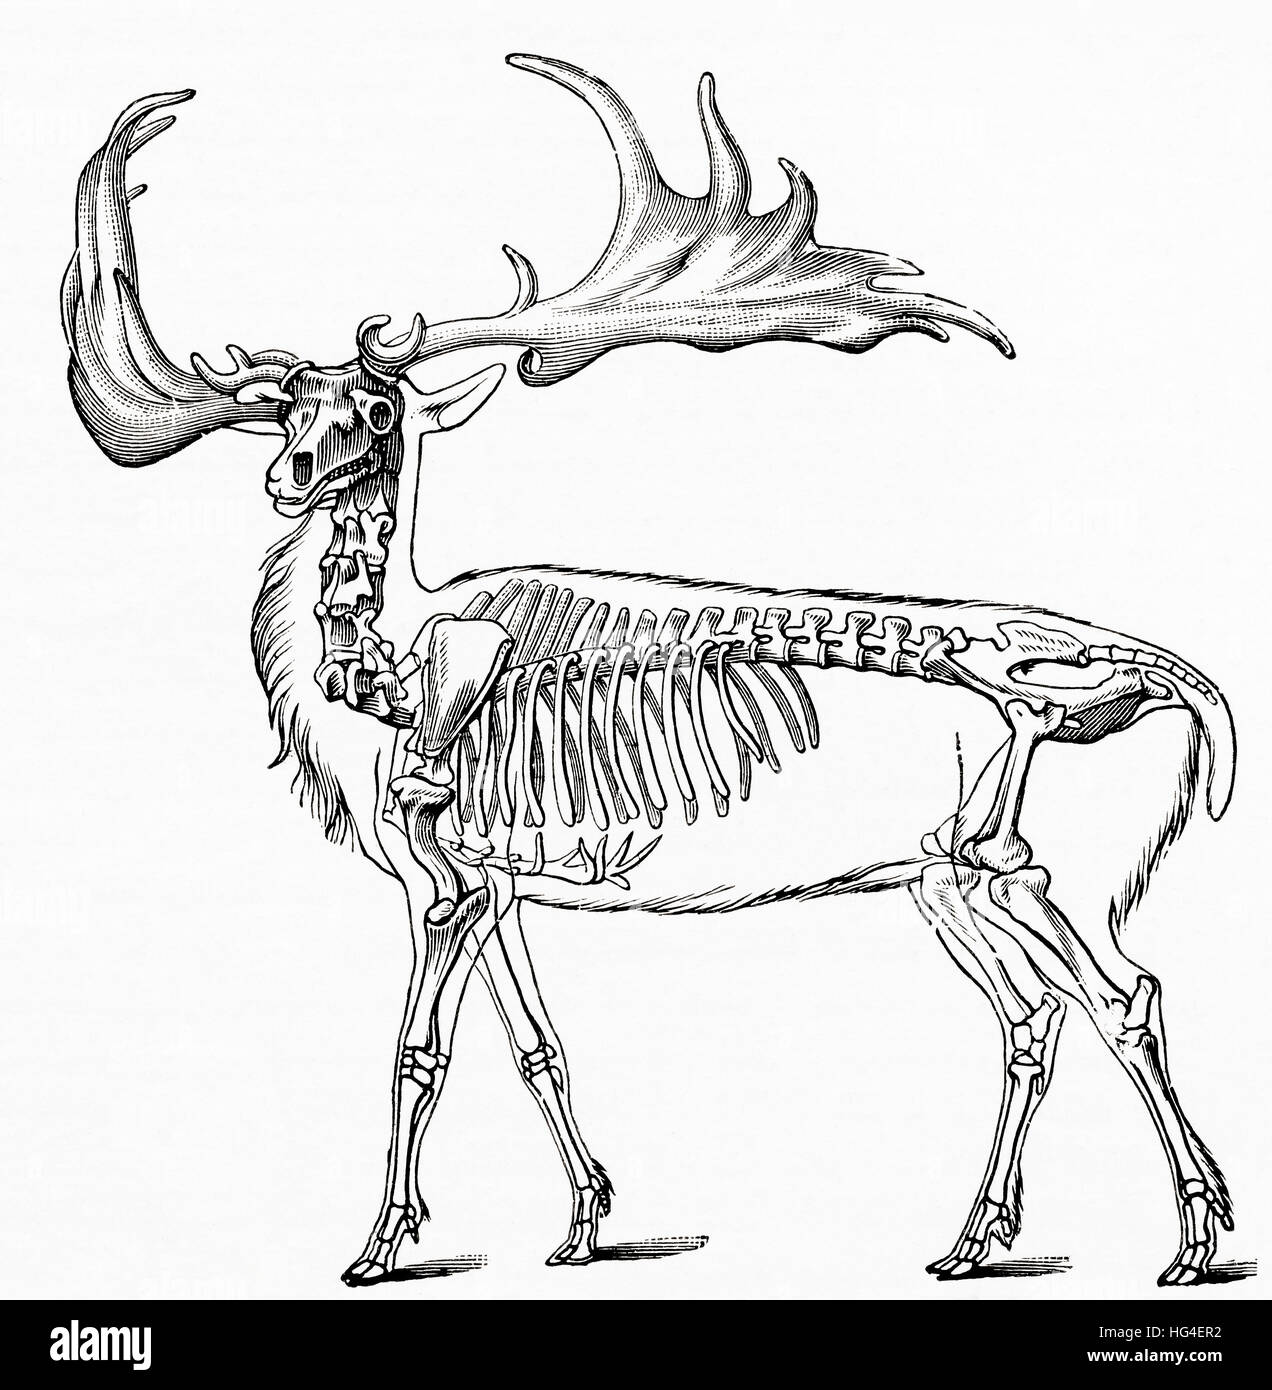 Megaloceros hibernicus, extint giant stag. From Meyers Lexicon, published 1924. Stock Photo